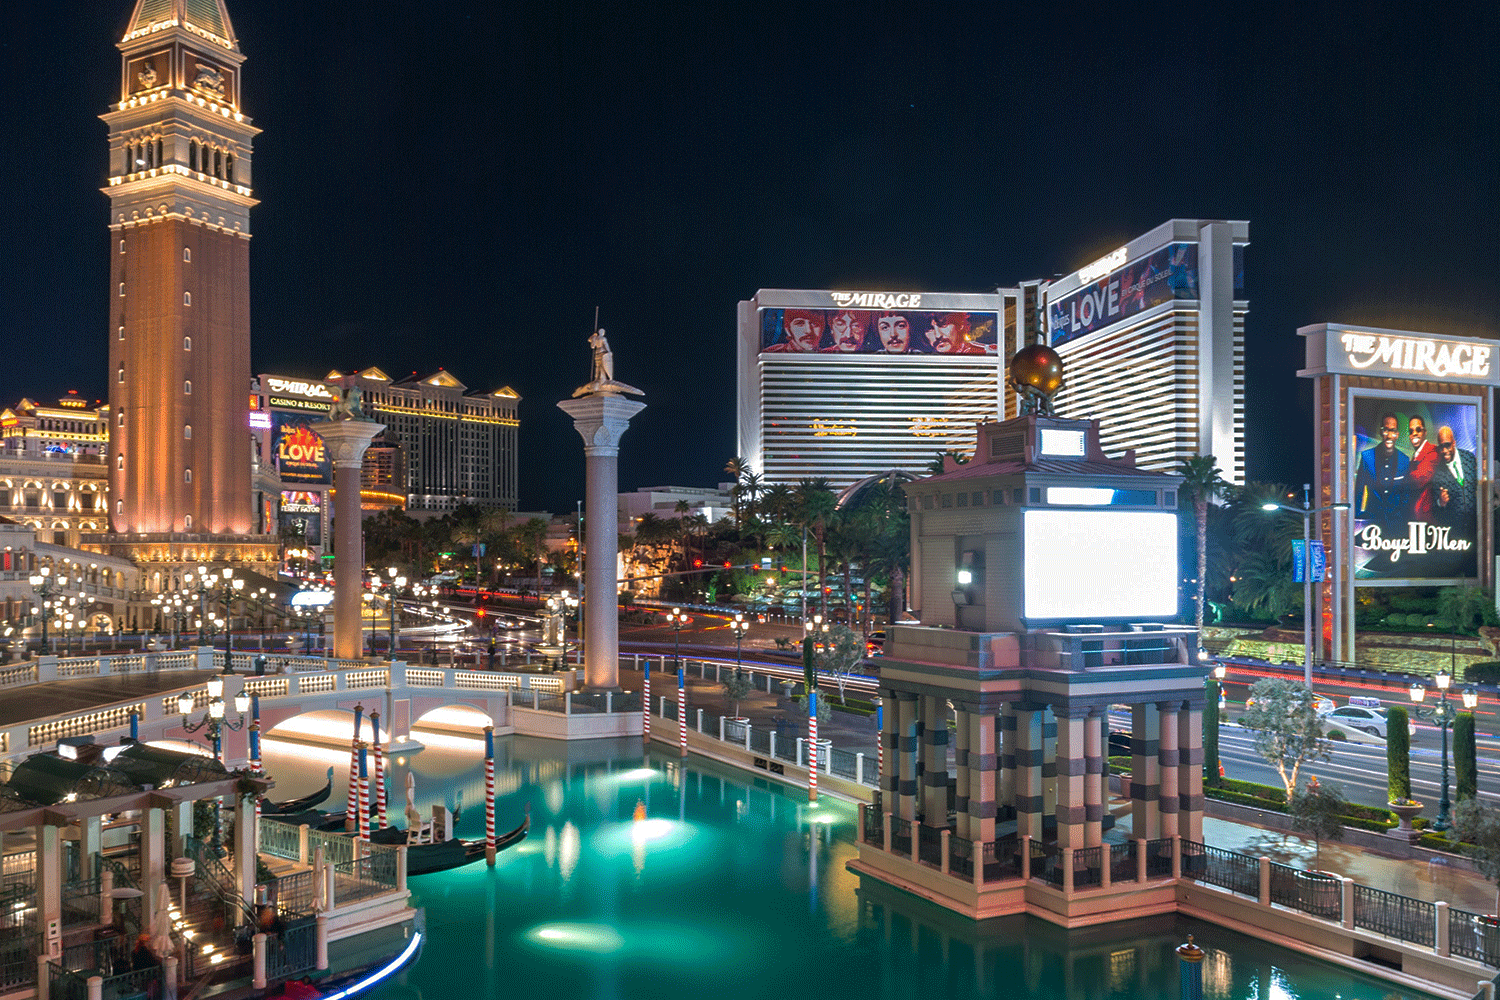 The Las Vegas Strip: The Complete Guide